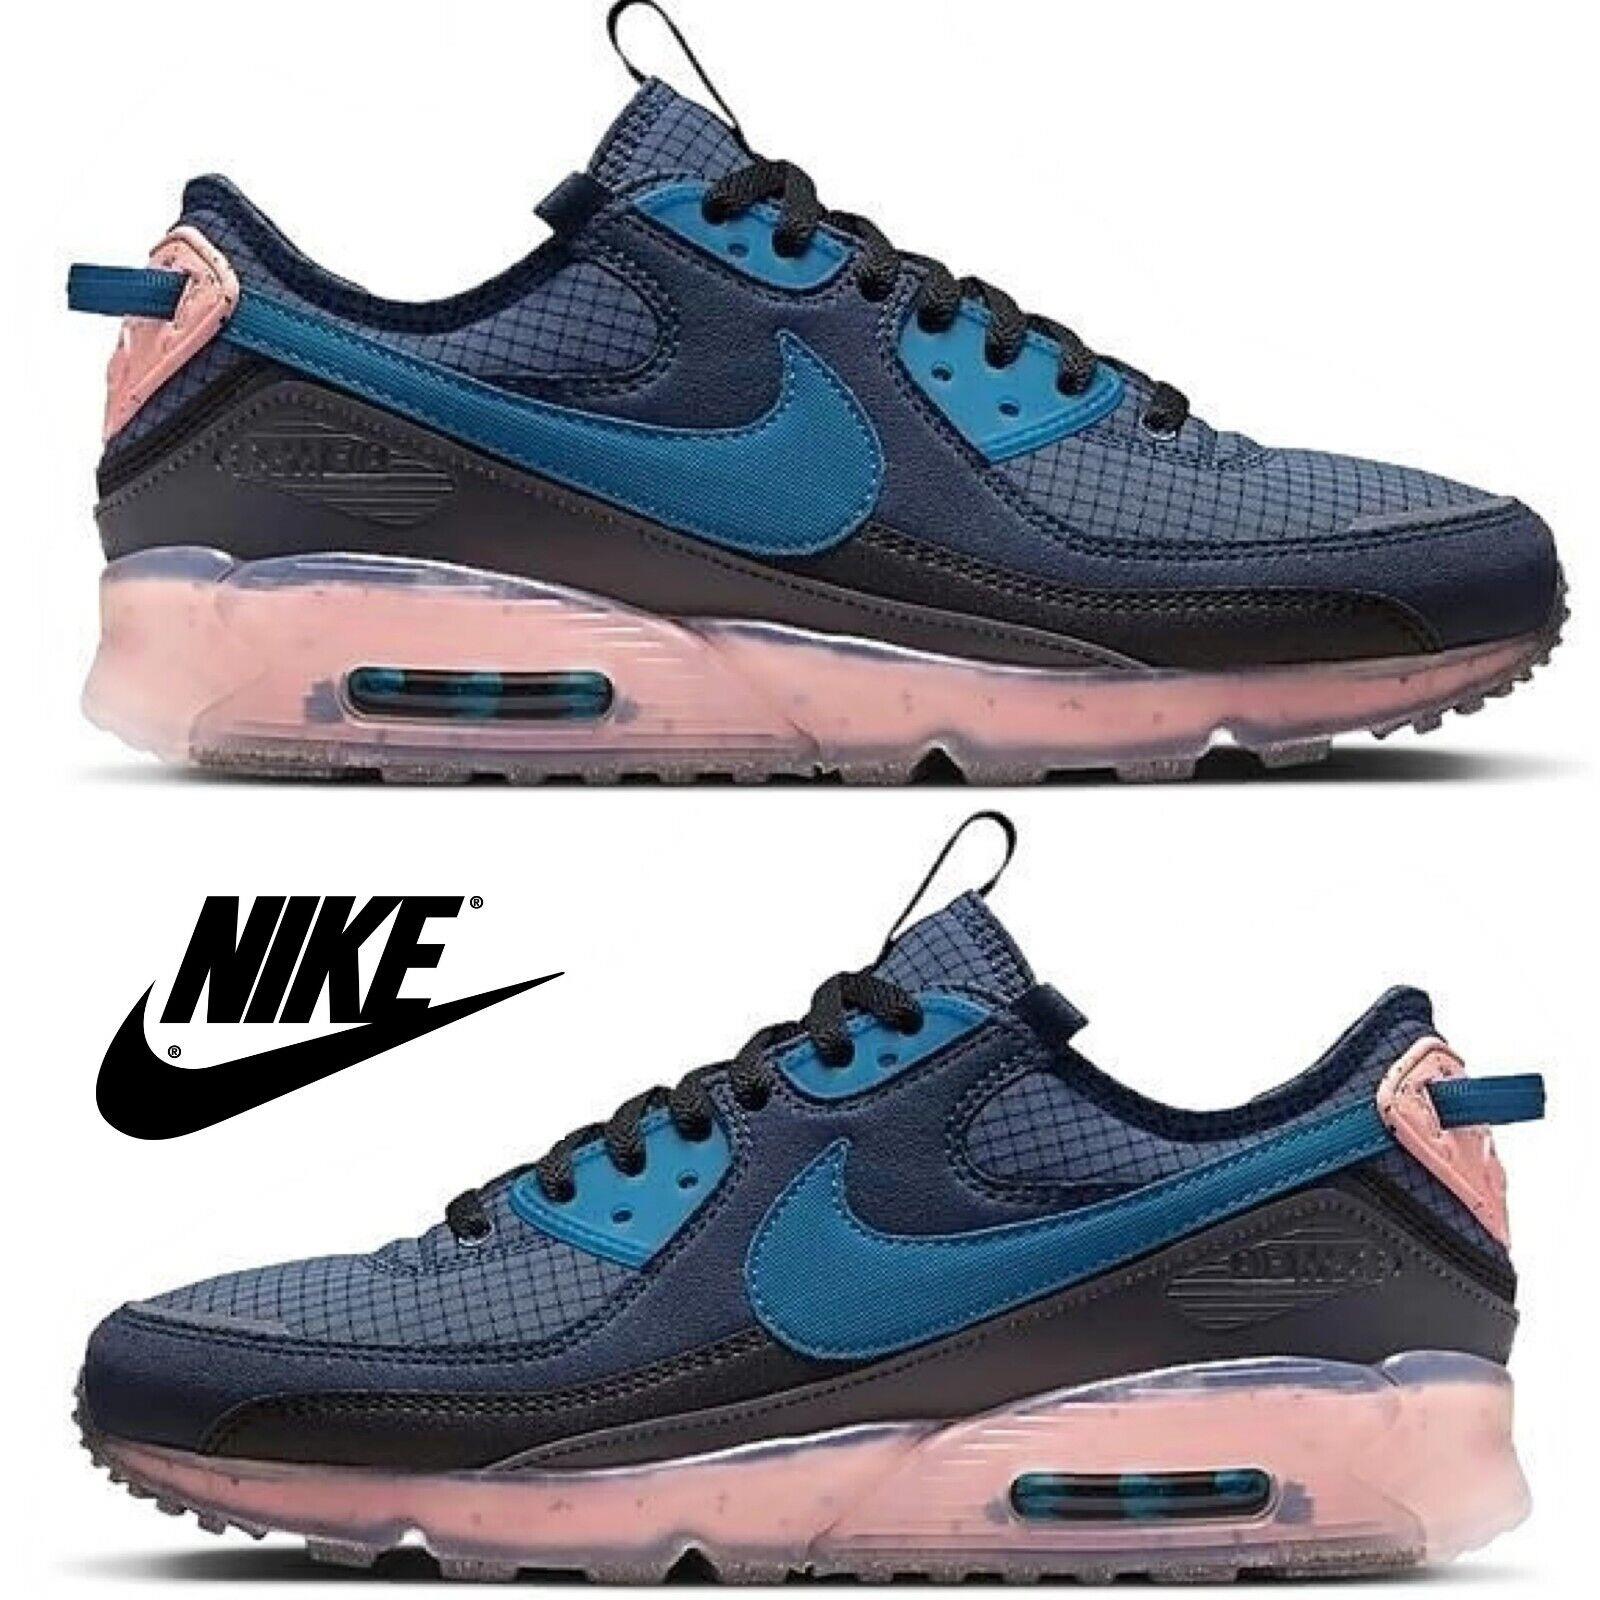 Nike Air Max 90 Terrascape Men`s Sneakers Running Athletic Sport Comfort Shoes